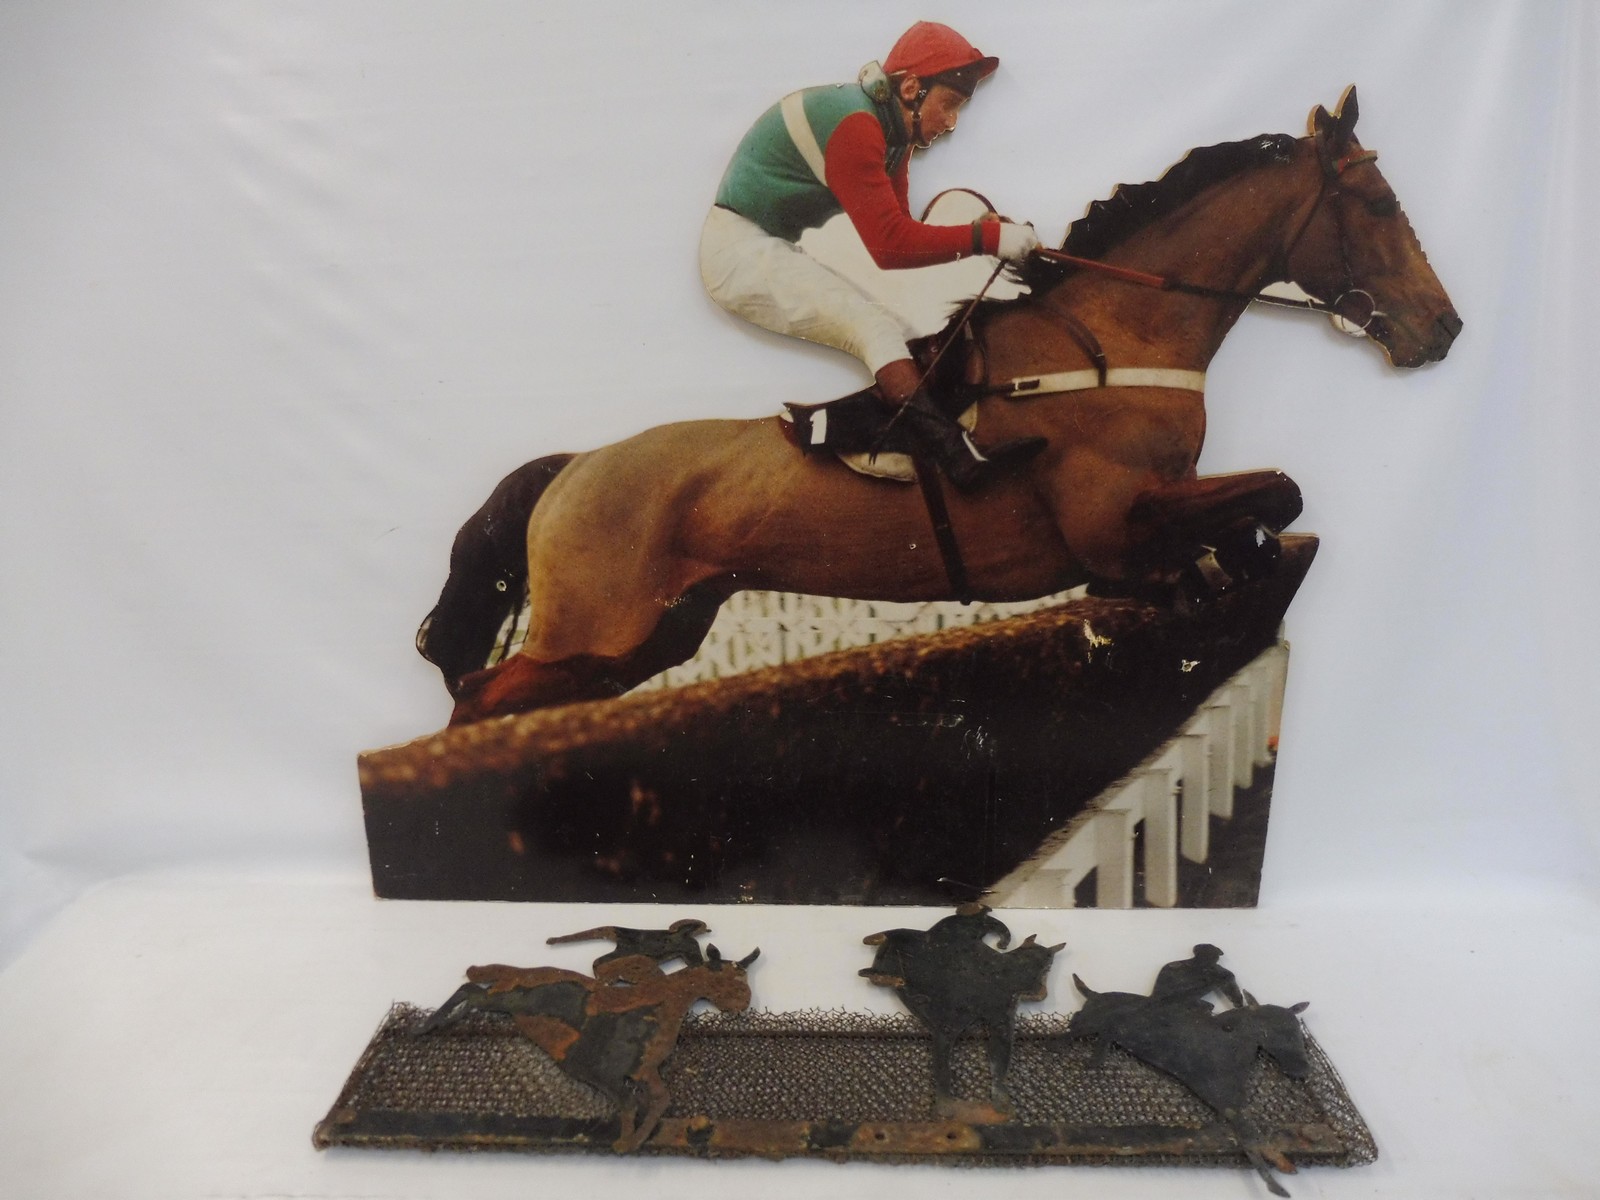 A folk art wirework fire guard with three horses and jockeys racing, plus a wooden horse racing